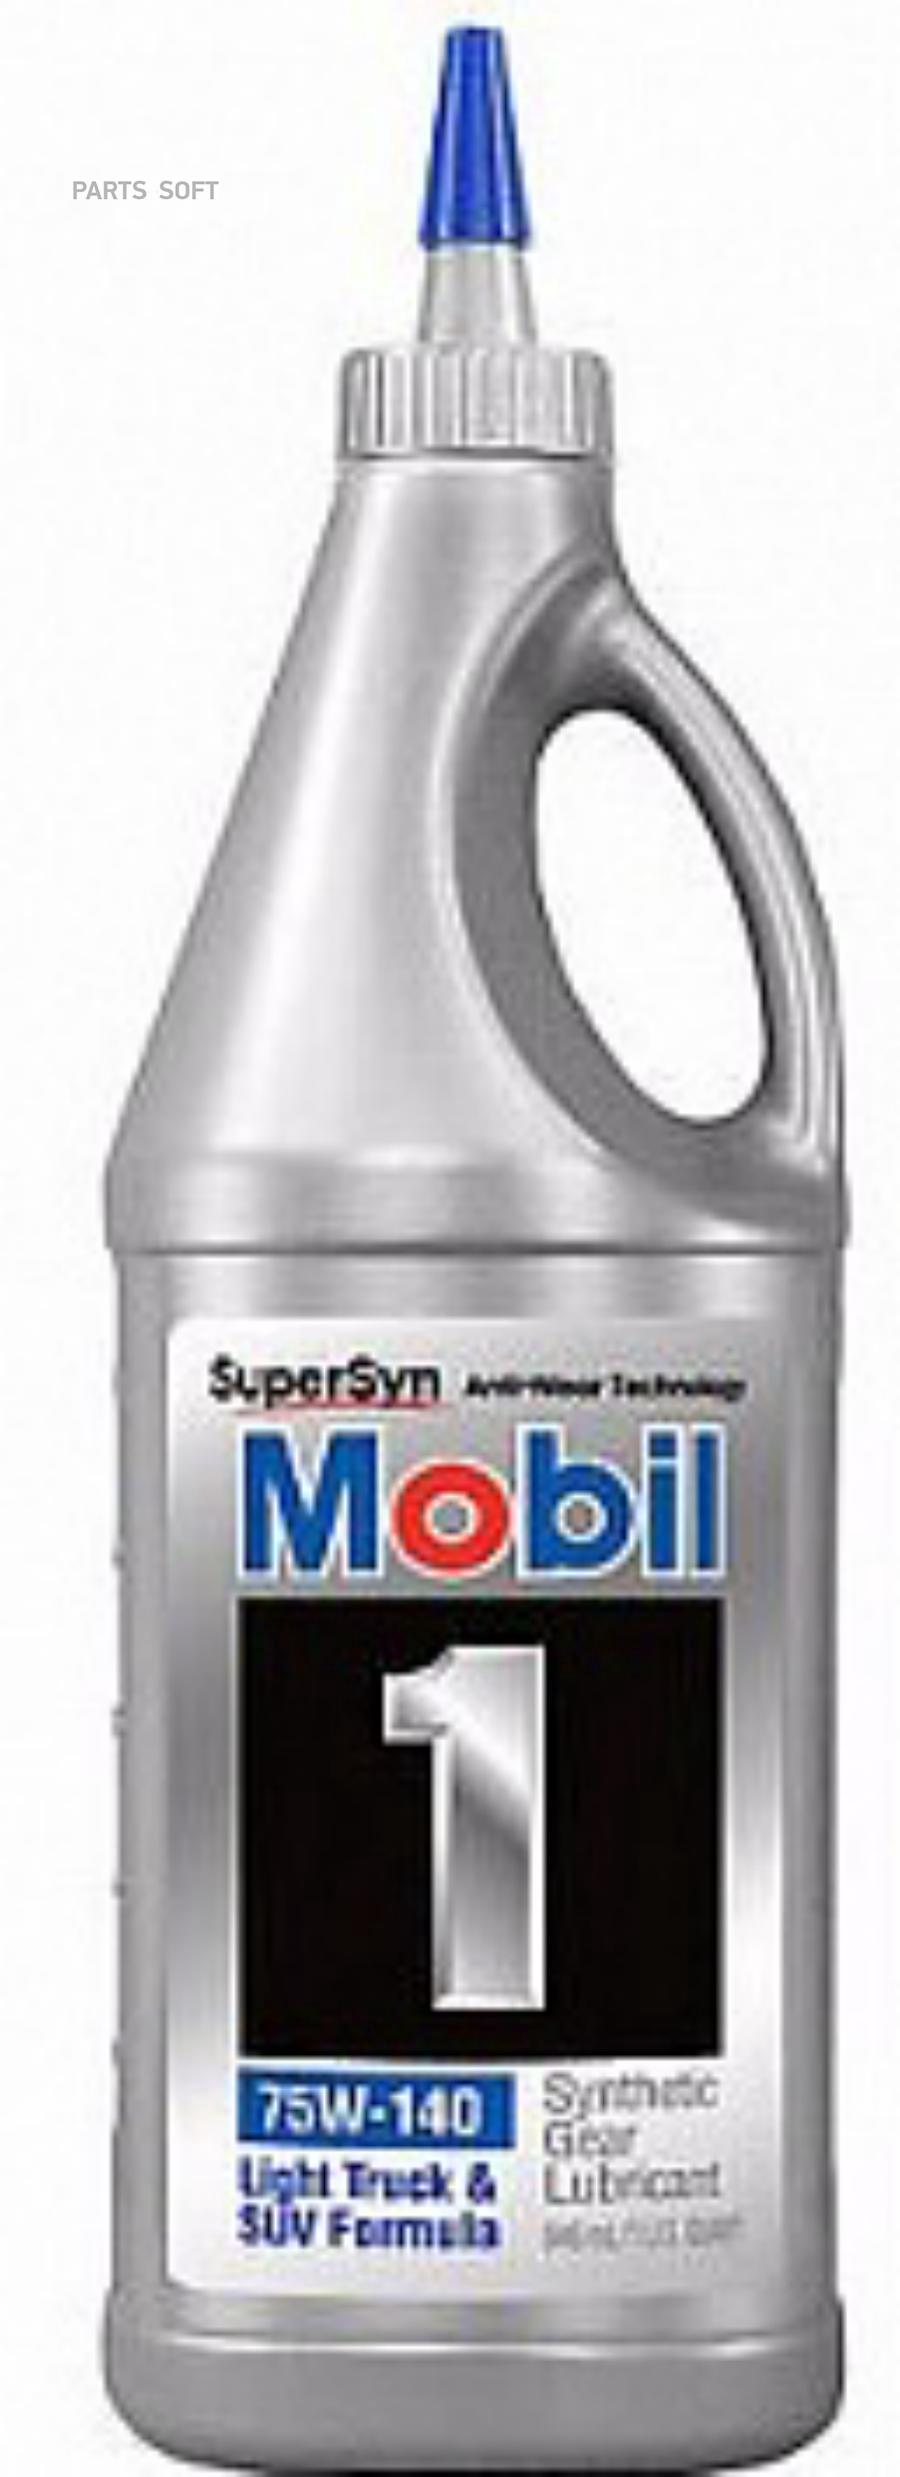 MOBIL 102490 Масло MOBIL 1 synthetic GEAR LUBE LS 75W-140,12X1 QT.